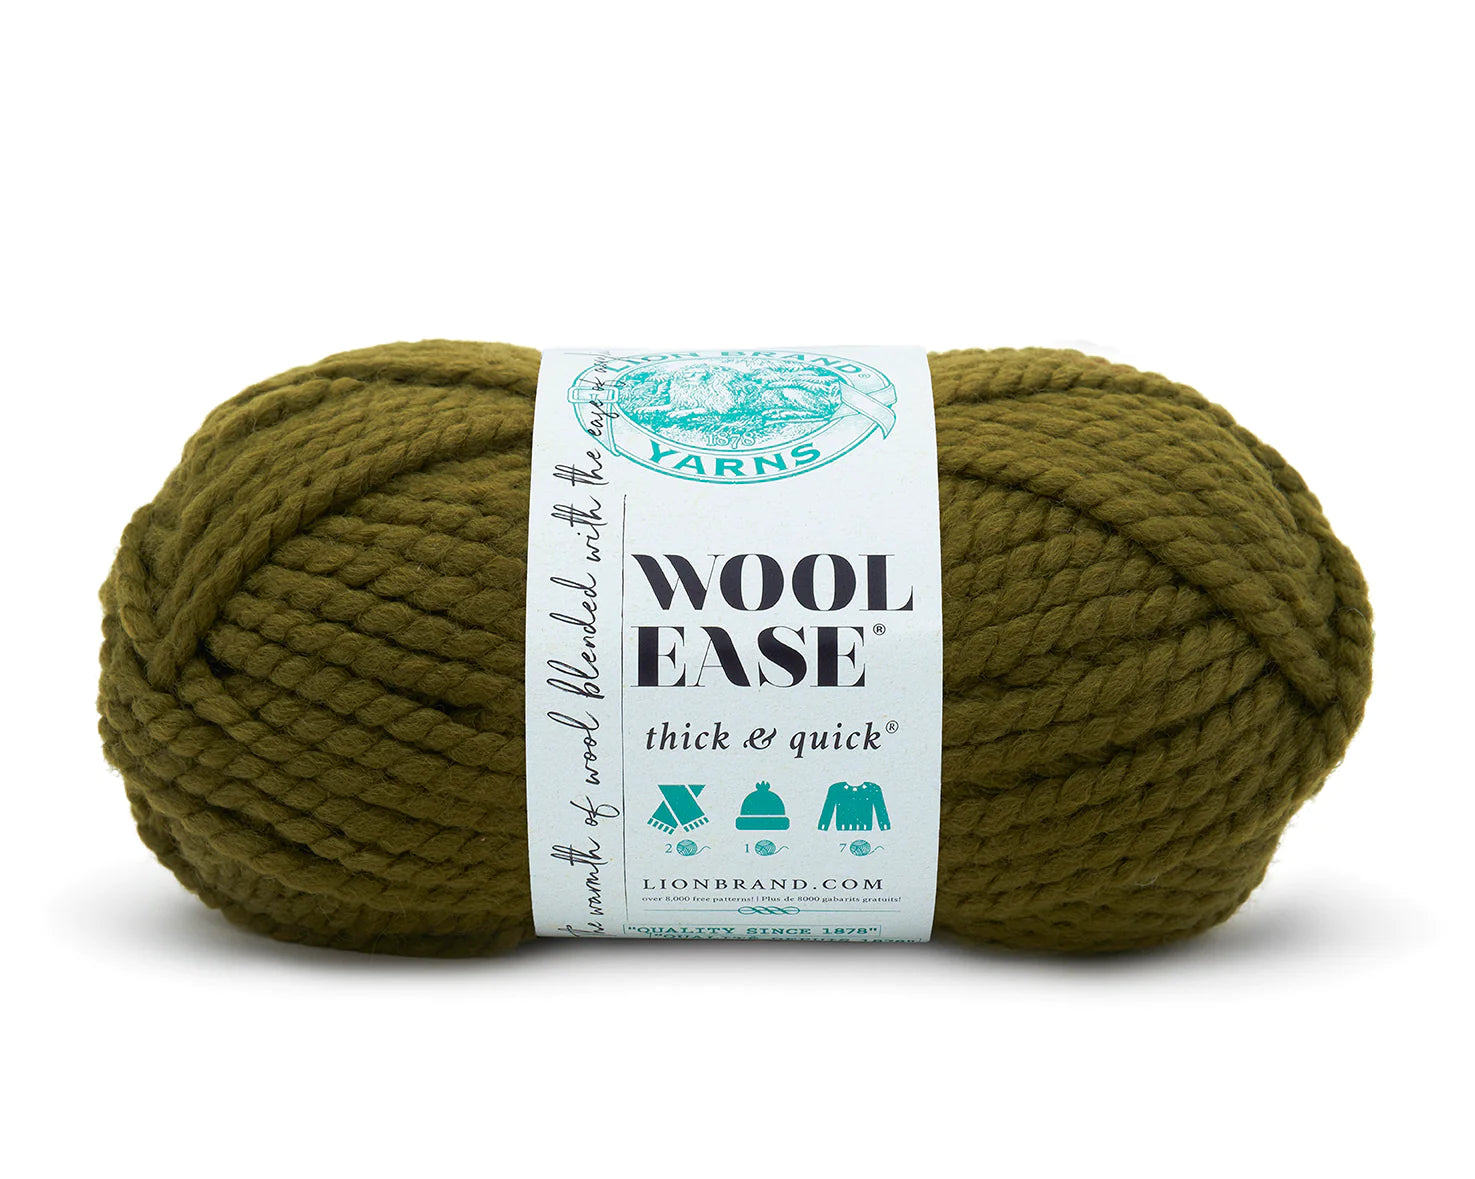 Lion Brand Yarn Wool-Ease Thick & Quick Yarn, Soft and Bulky Yarn for  Knitting, Crocheting, and Crafting, 1 Skein, City Lights